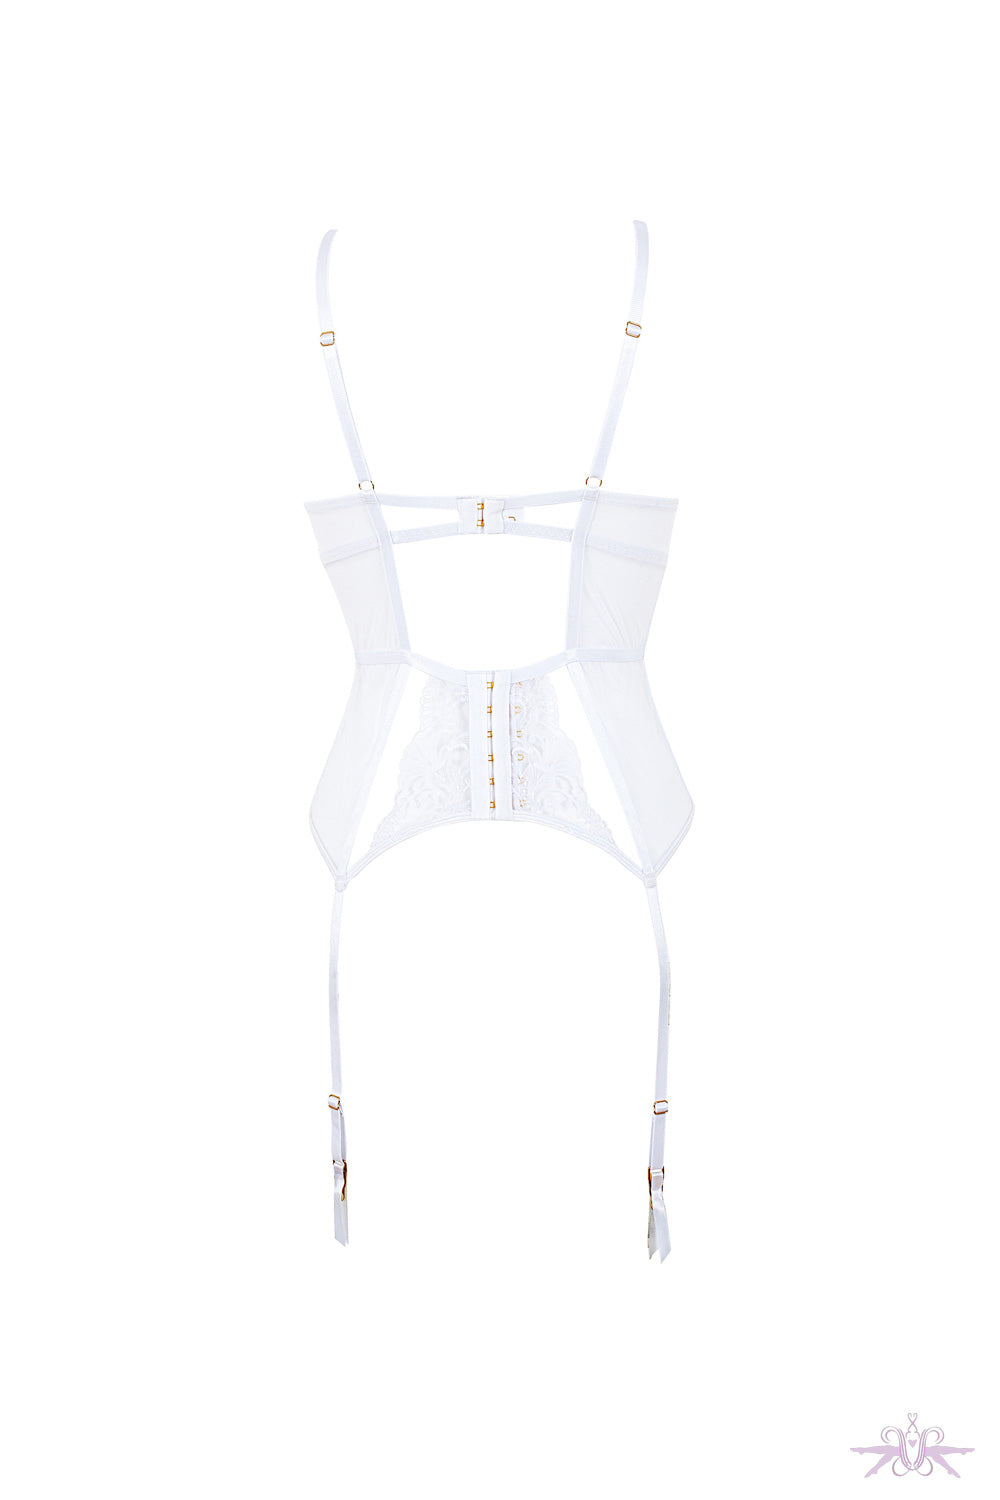 Bluebela Marseille White Basque at the Hosiery Box Basque and 